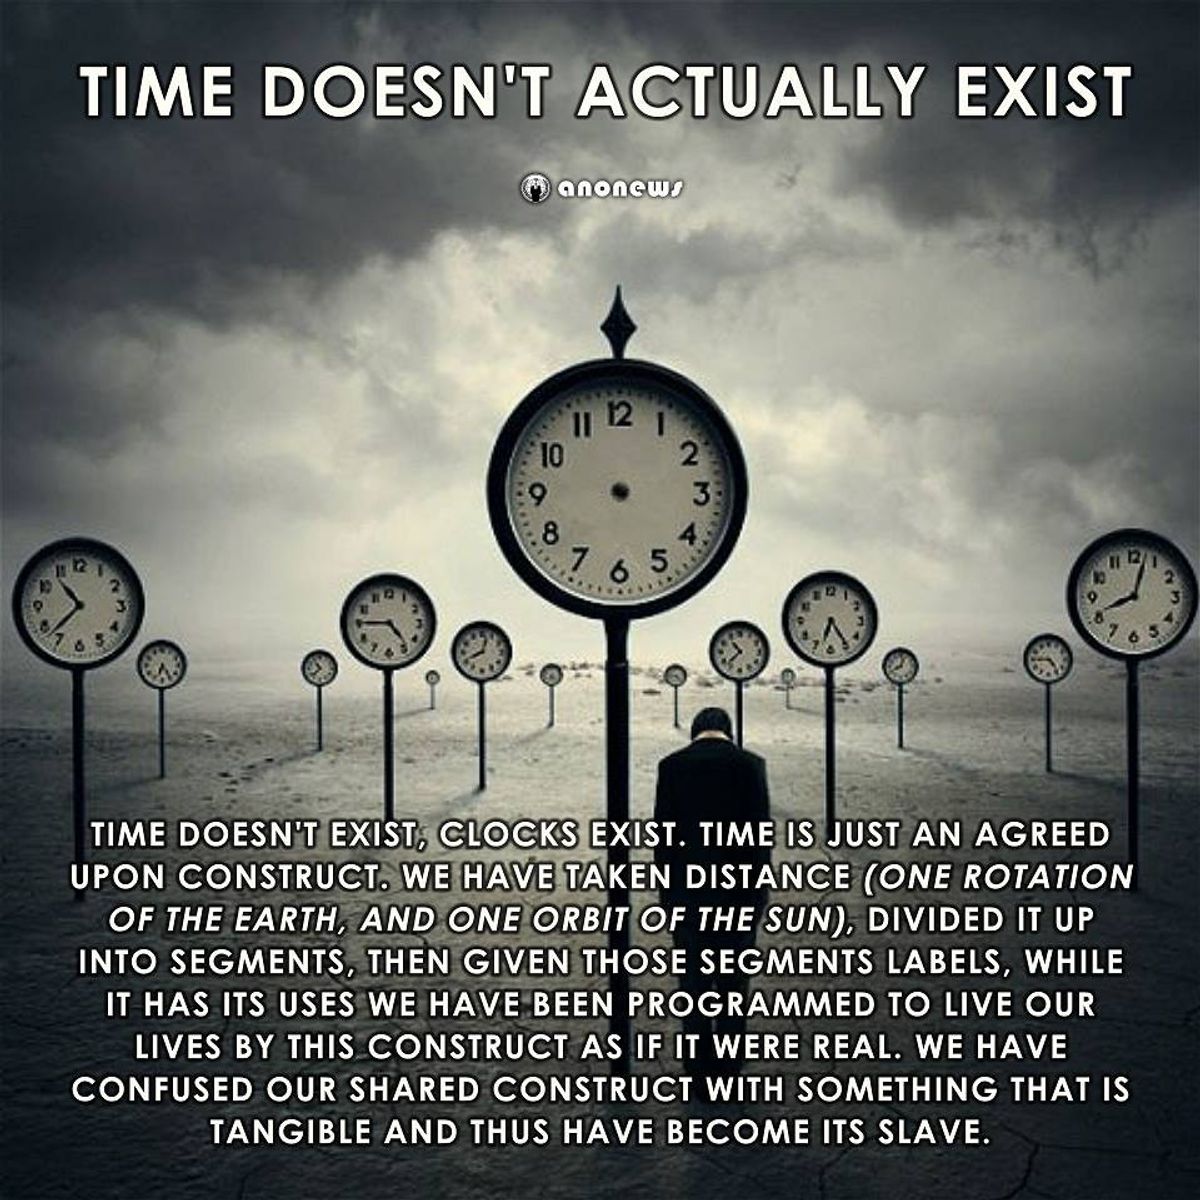 What Does Time Mean to You?